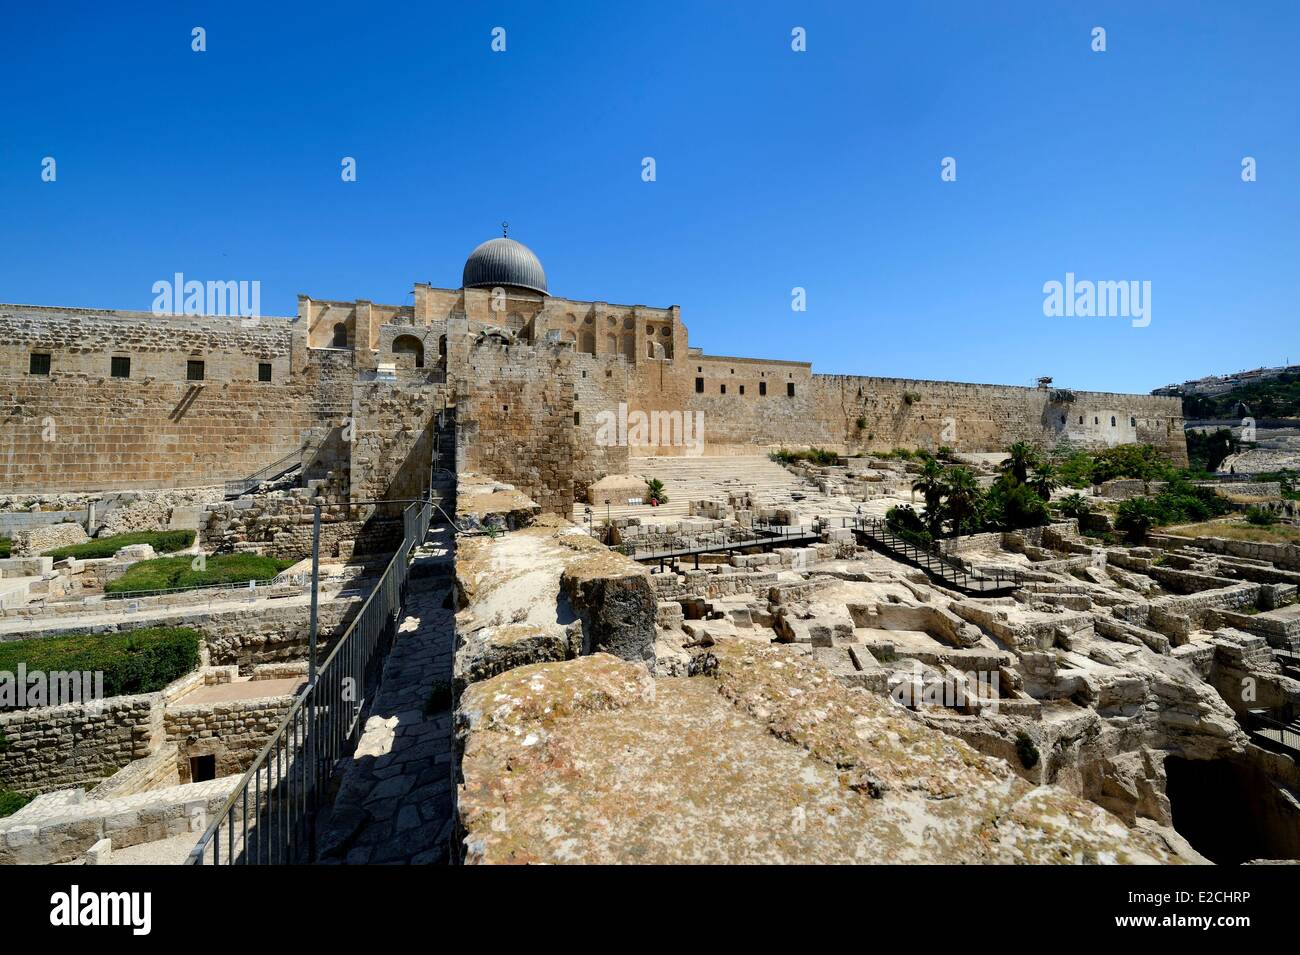 Israel, Jerusalem, holy city, the old town listed as World Heritage by UNESCO, the Temple Mount seen from the Davidson Center, south retaining walls of the Temple built by Herod the Great and the Al Aqsa mosque Stock Photo